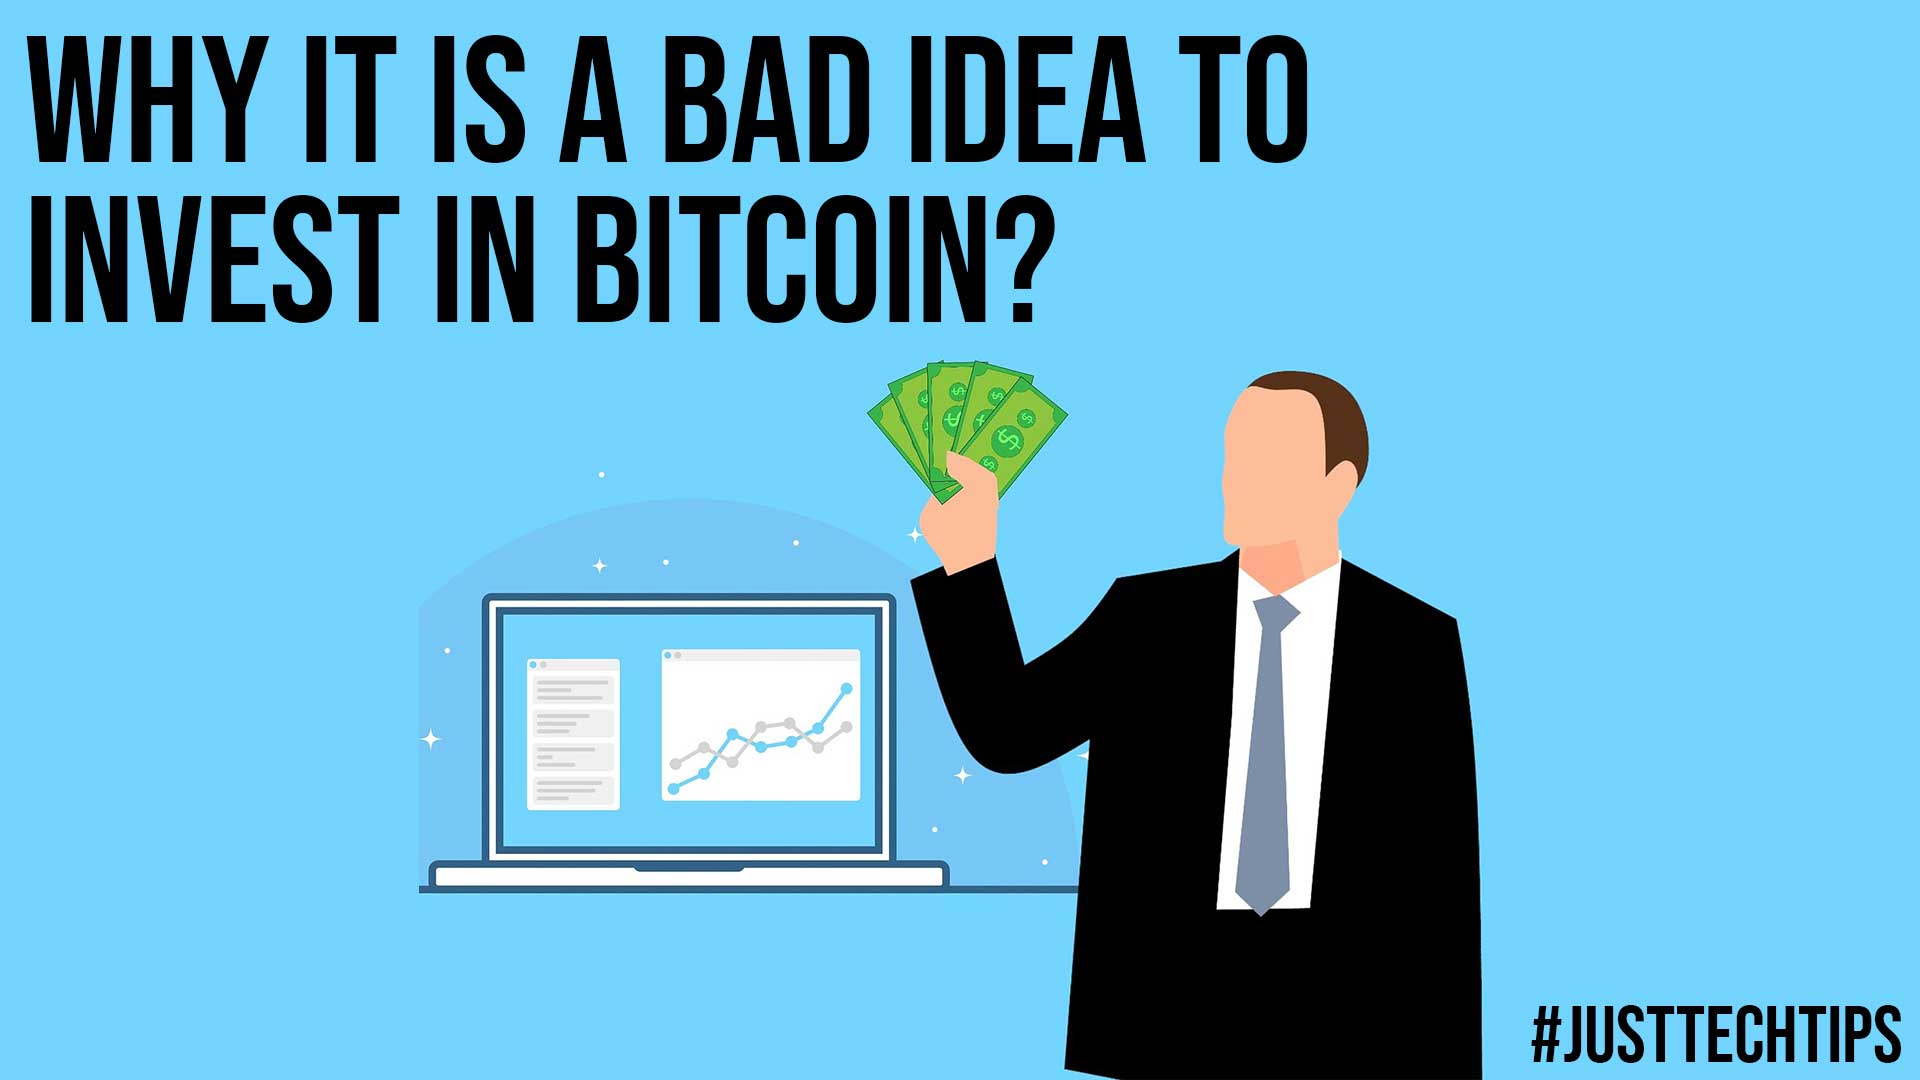 Why It is a Bad Idea to Invest in Bitcoin